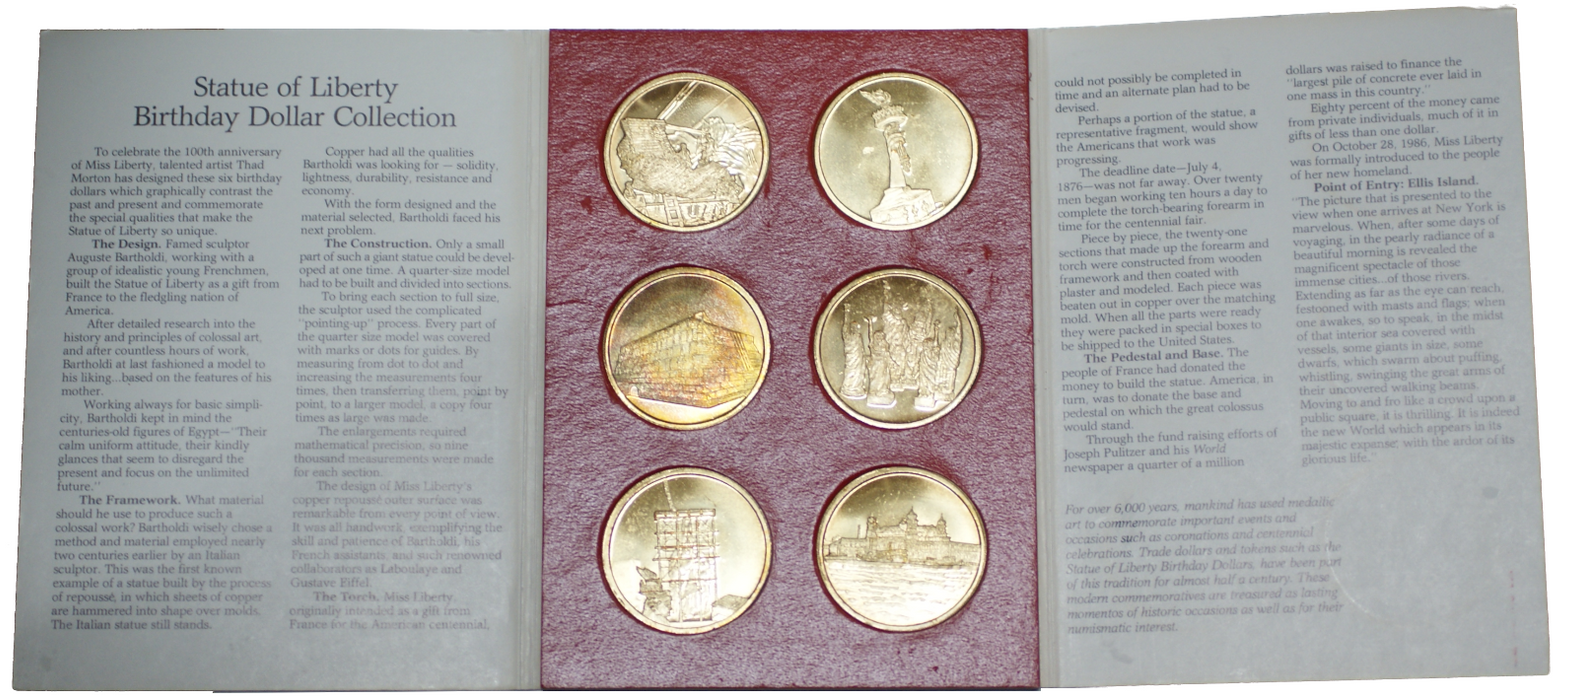 Statue of Liberty Centennial Birthday Dollars 6 Coin Set in Card